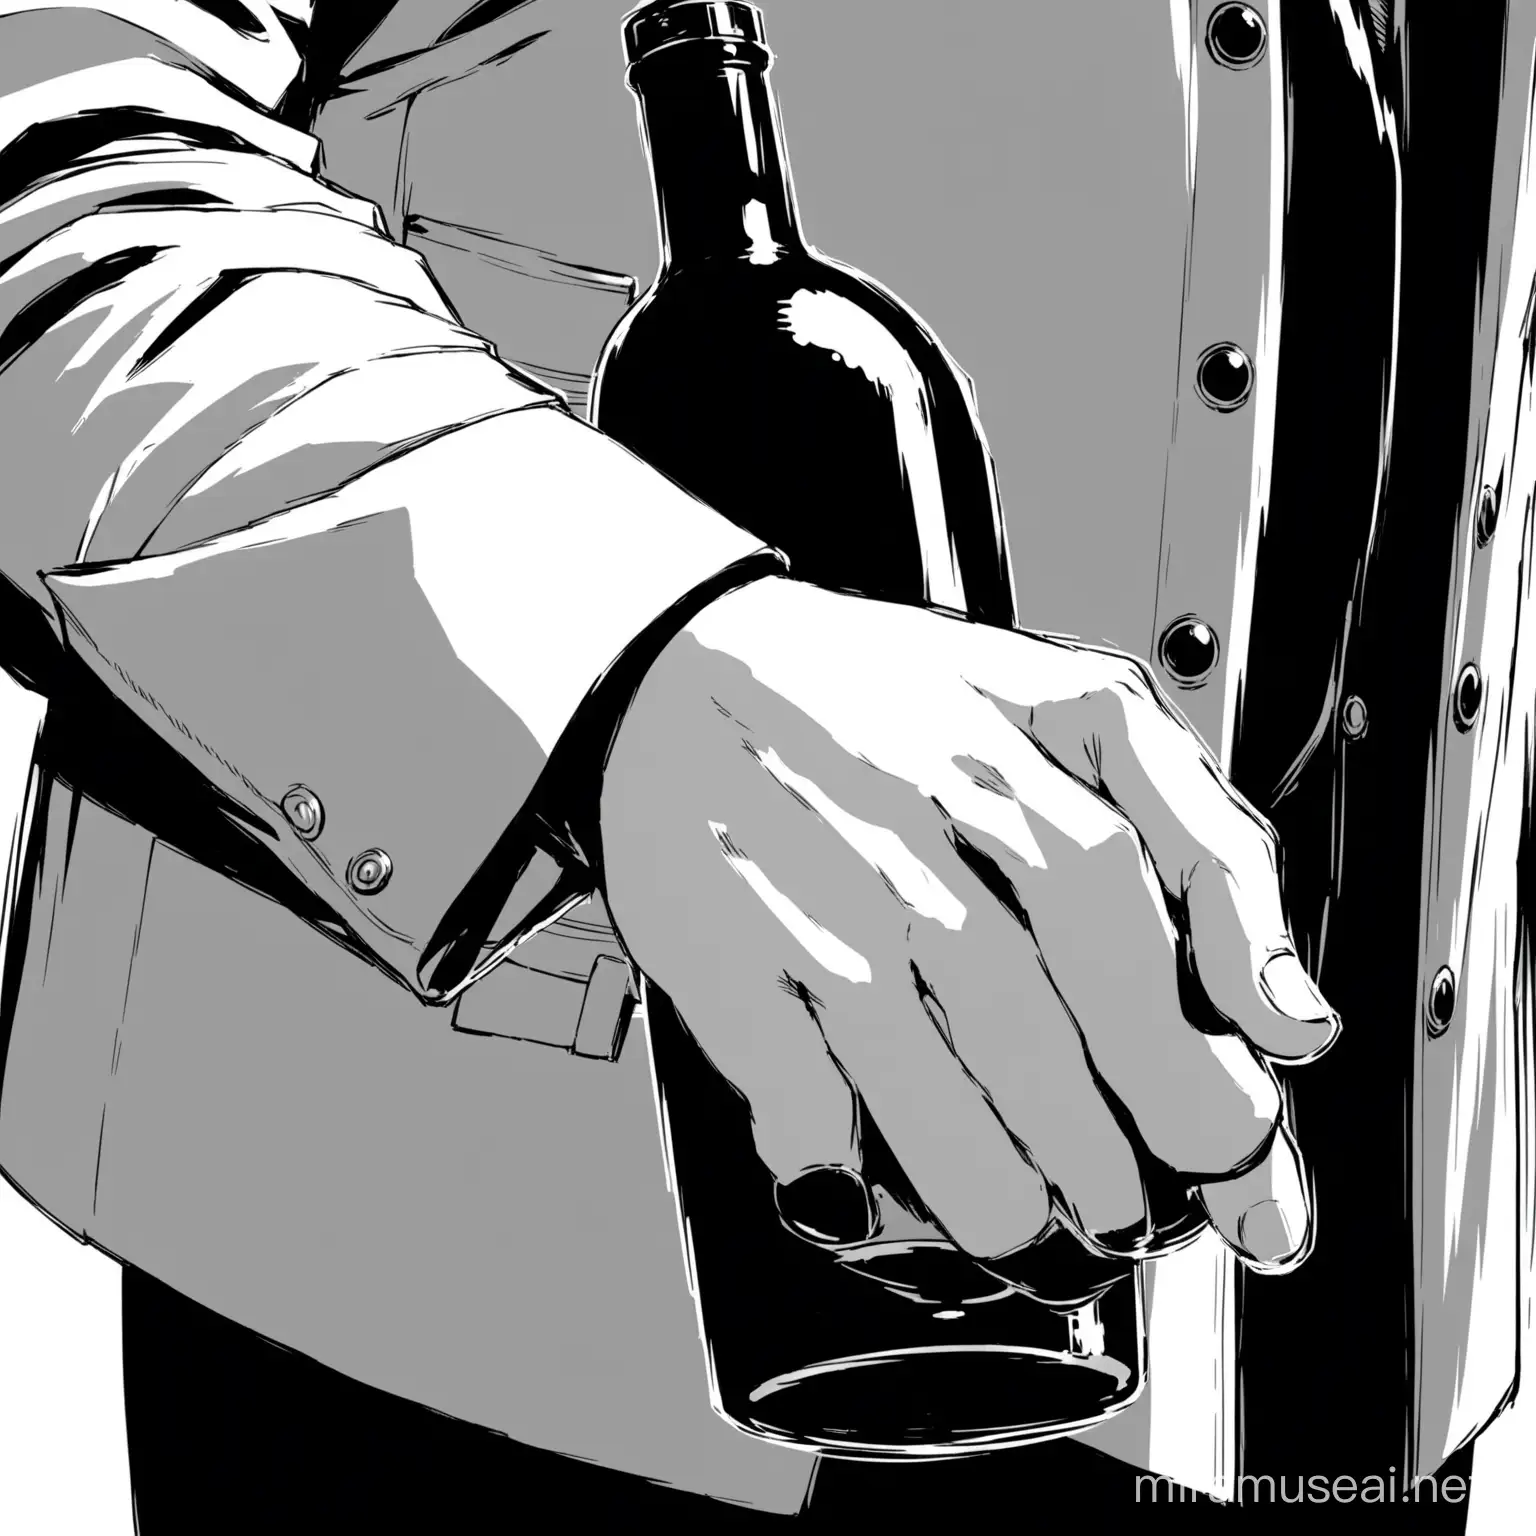 black and white manga illustration of a close up male anime hand holding a bottle of wine